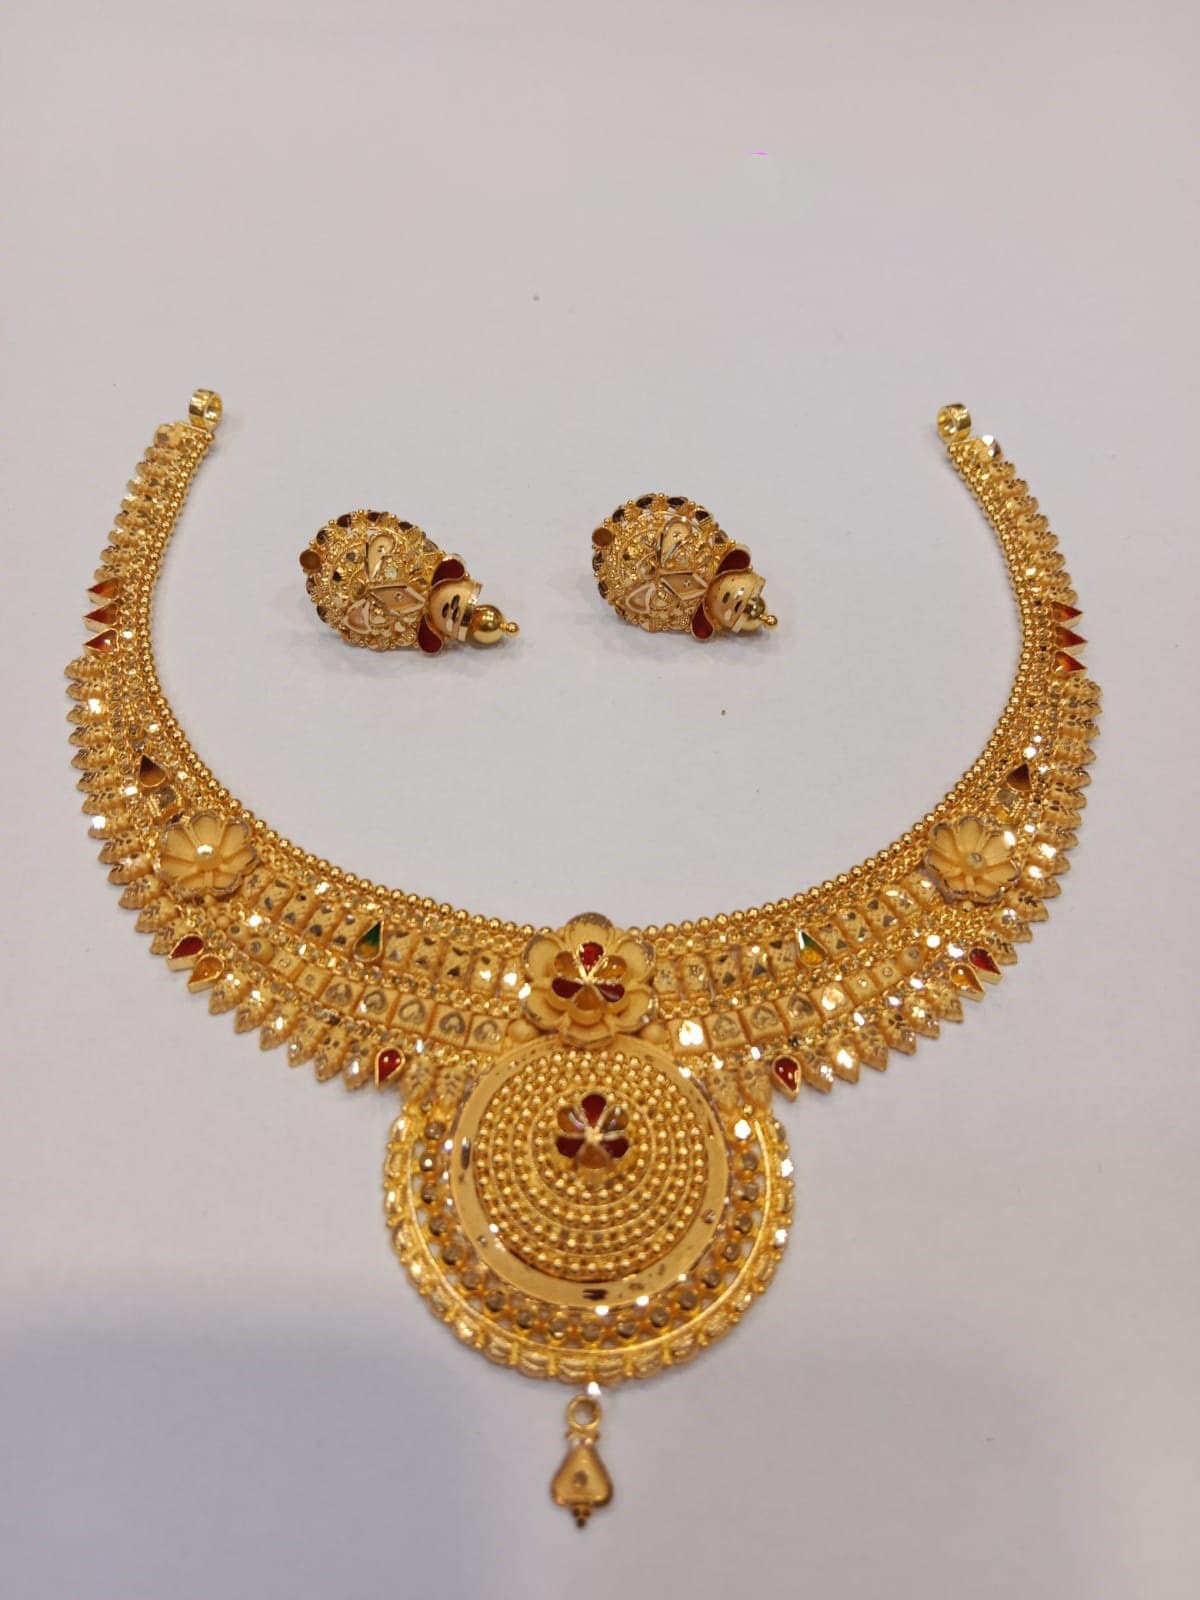 22k Indian gold plated necklace Long chain necklace sets fashion JEWELRY |  eBay